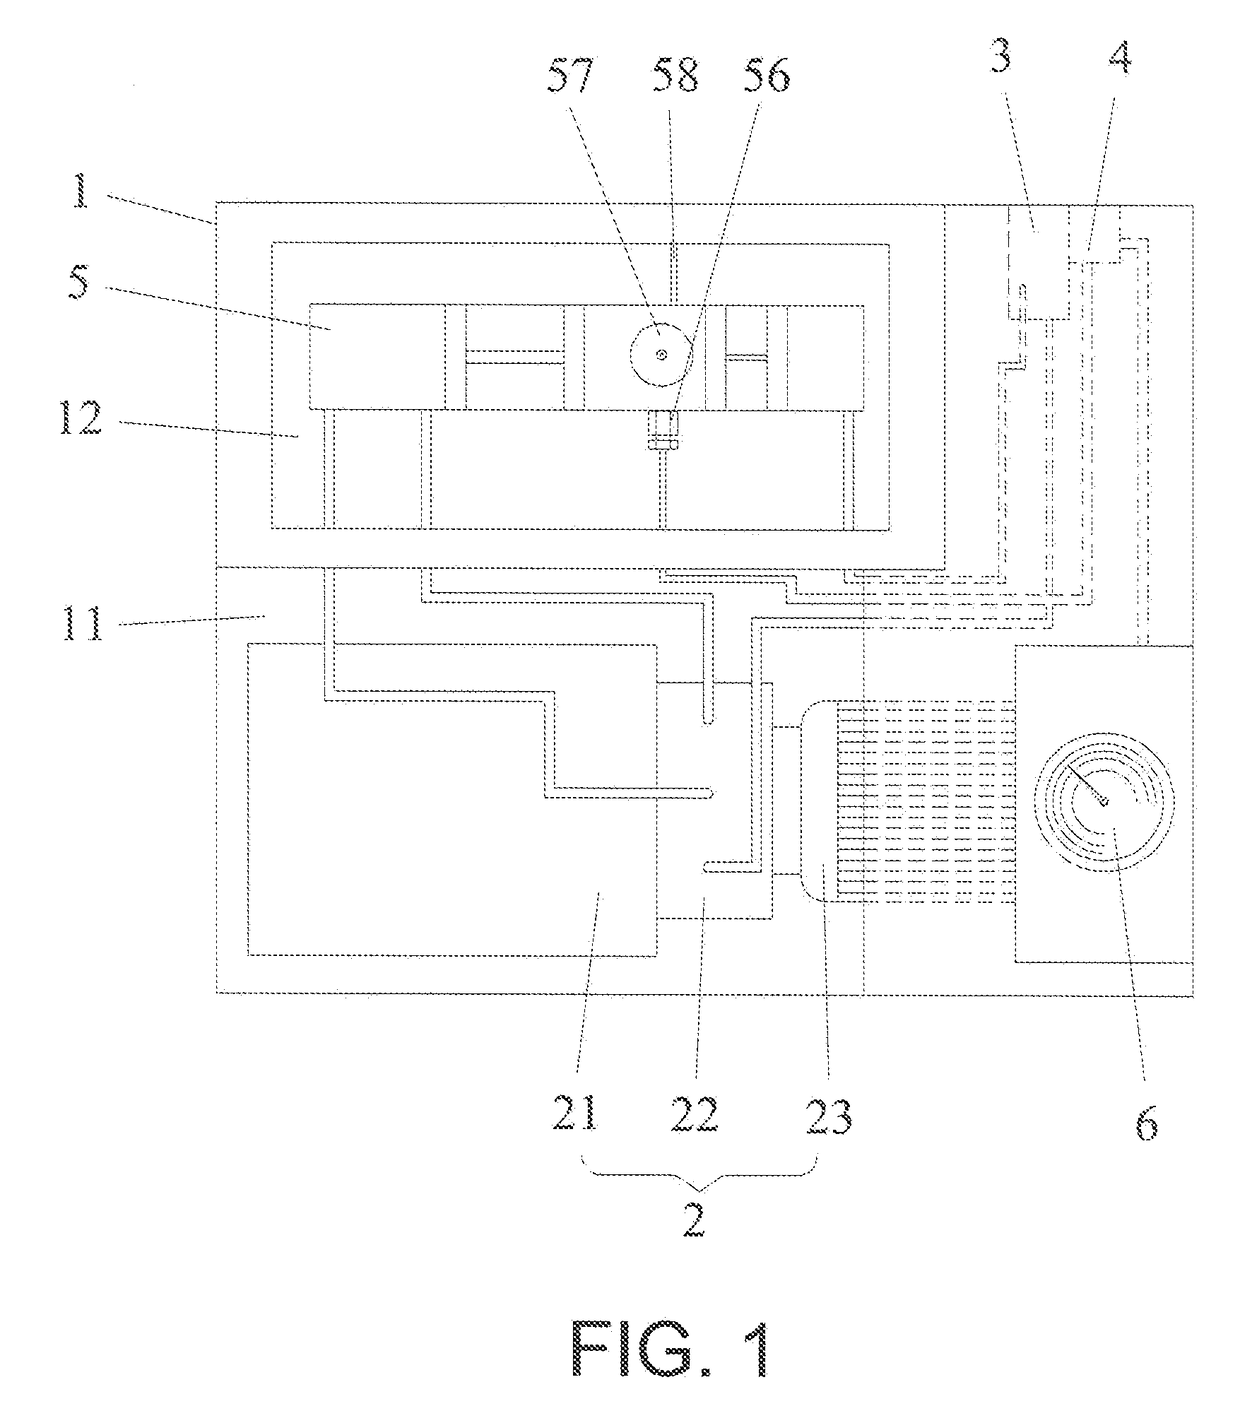 Ultrahigh-pressure homogenizing integrated device and cell disruptor